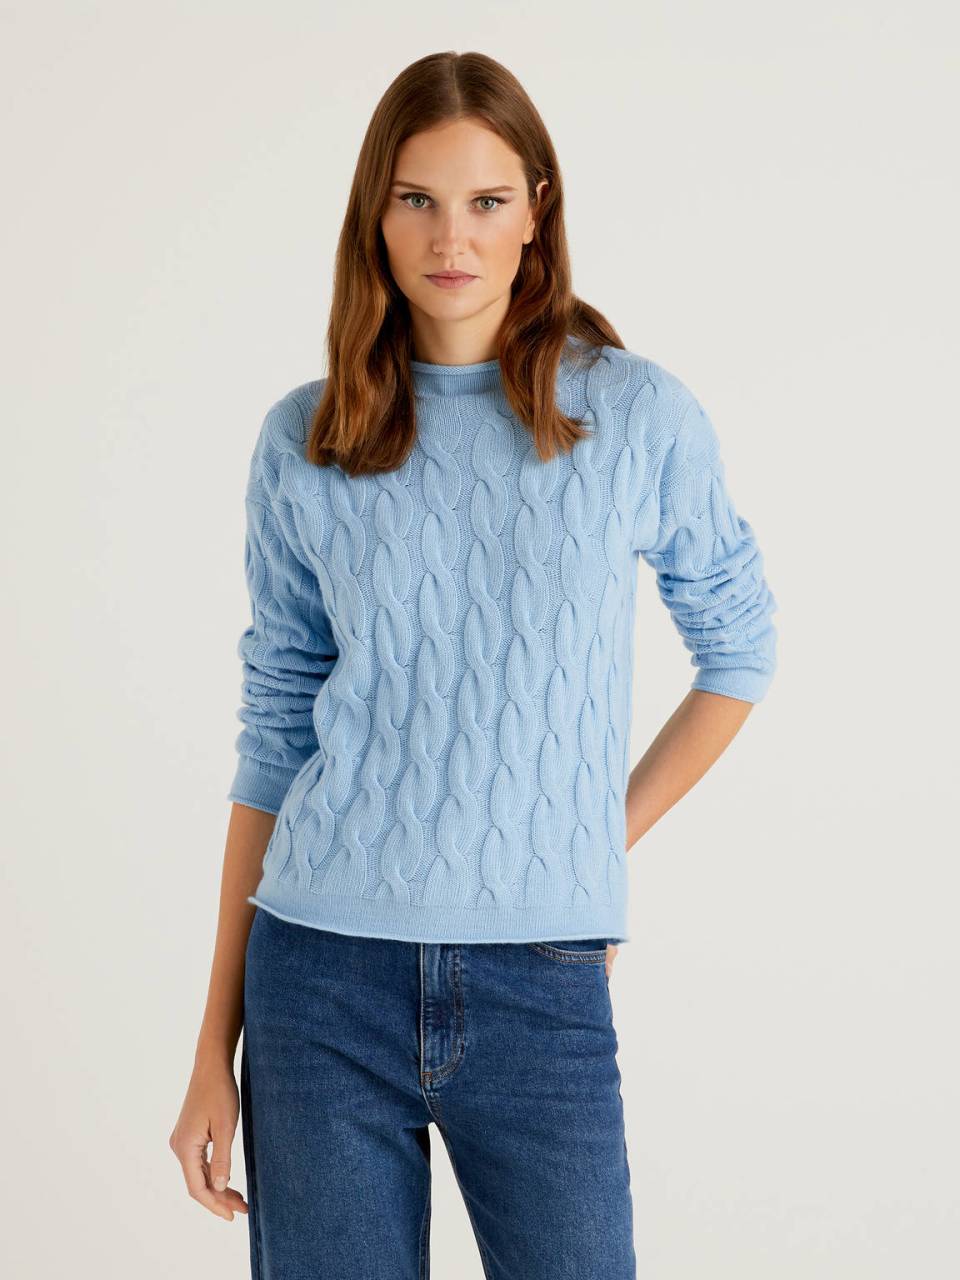 Benetton Cable knit sweater. 1